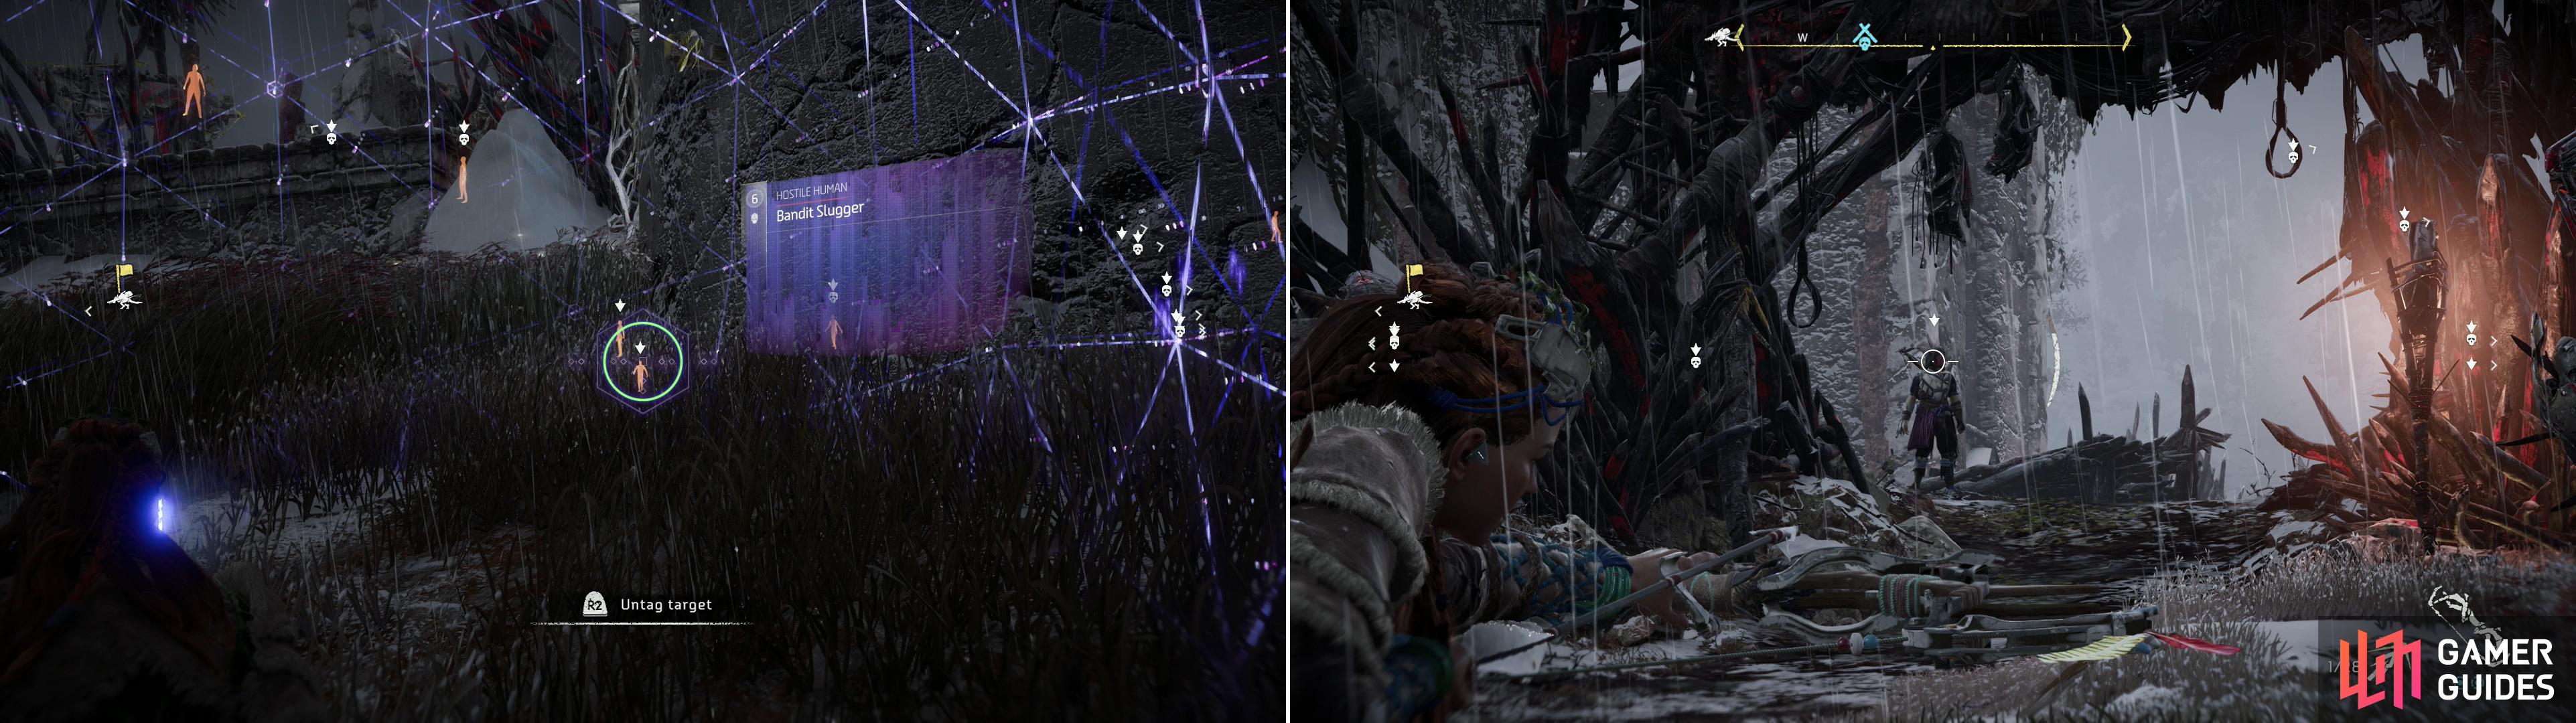 Scout the camp with your Focus and mark enemies (left) which will make picking off exposed targets from the edge of camp much easier (right).